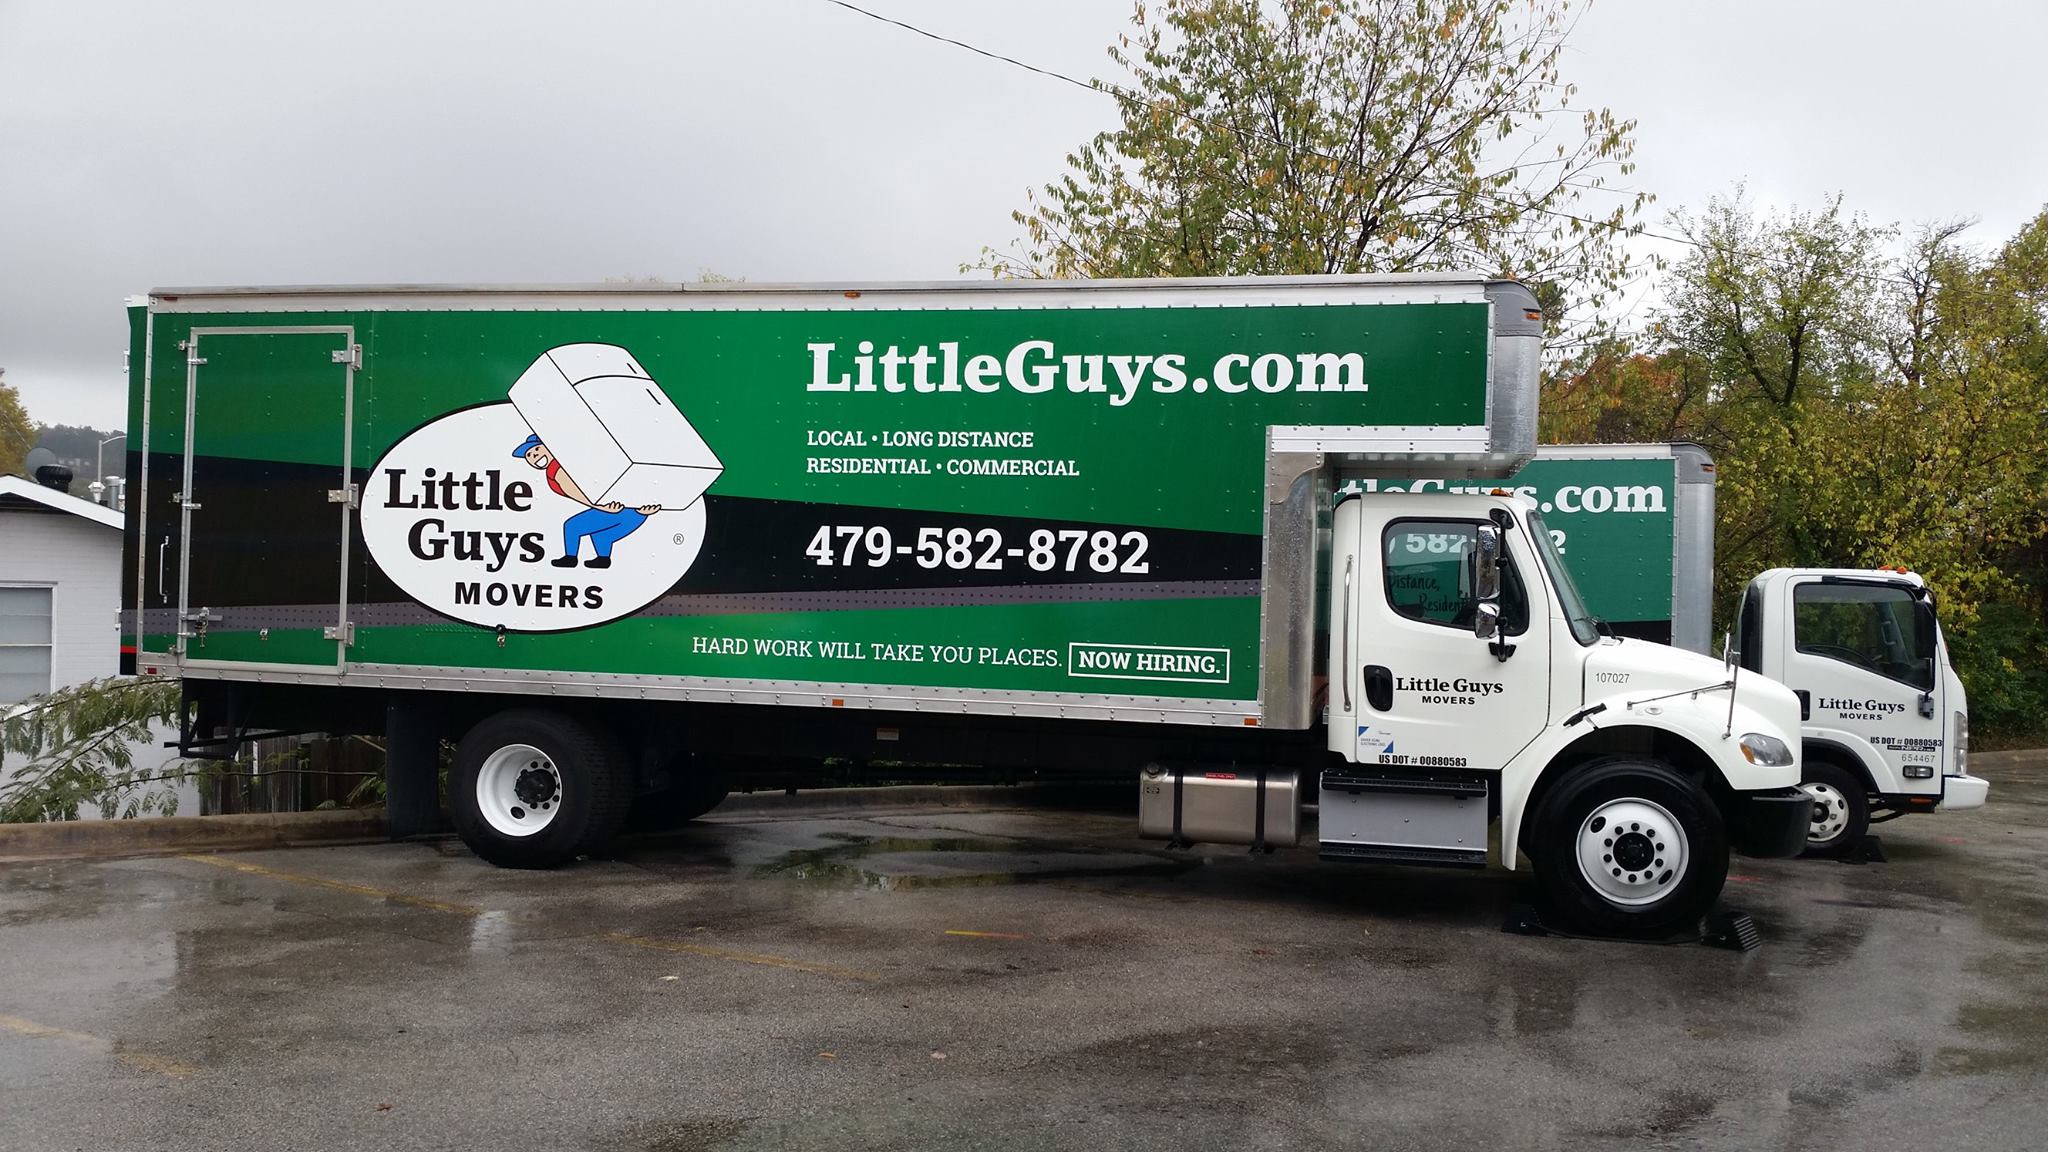 Little Guys Movers truck